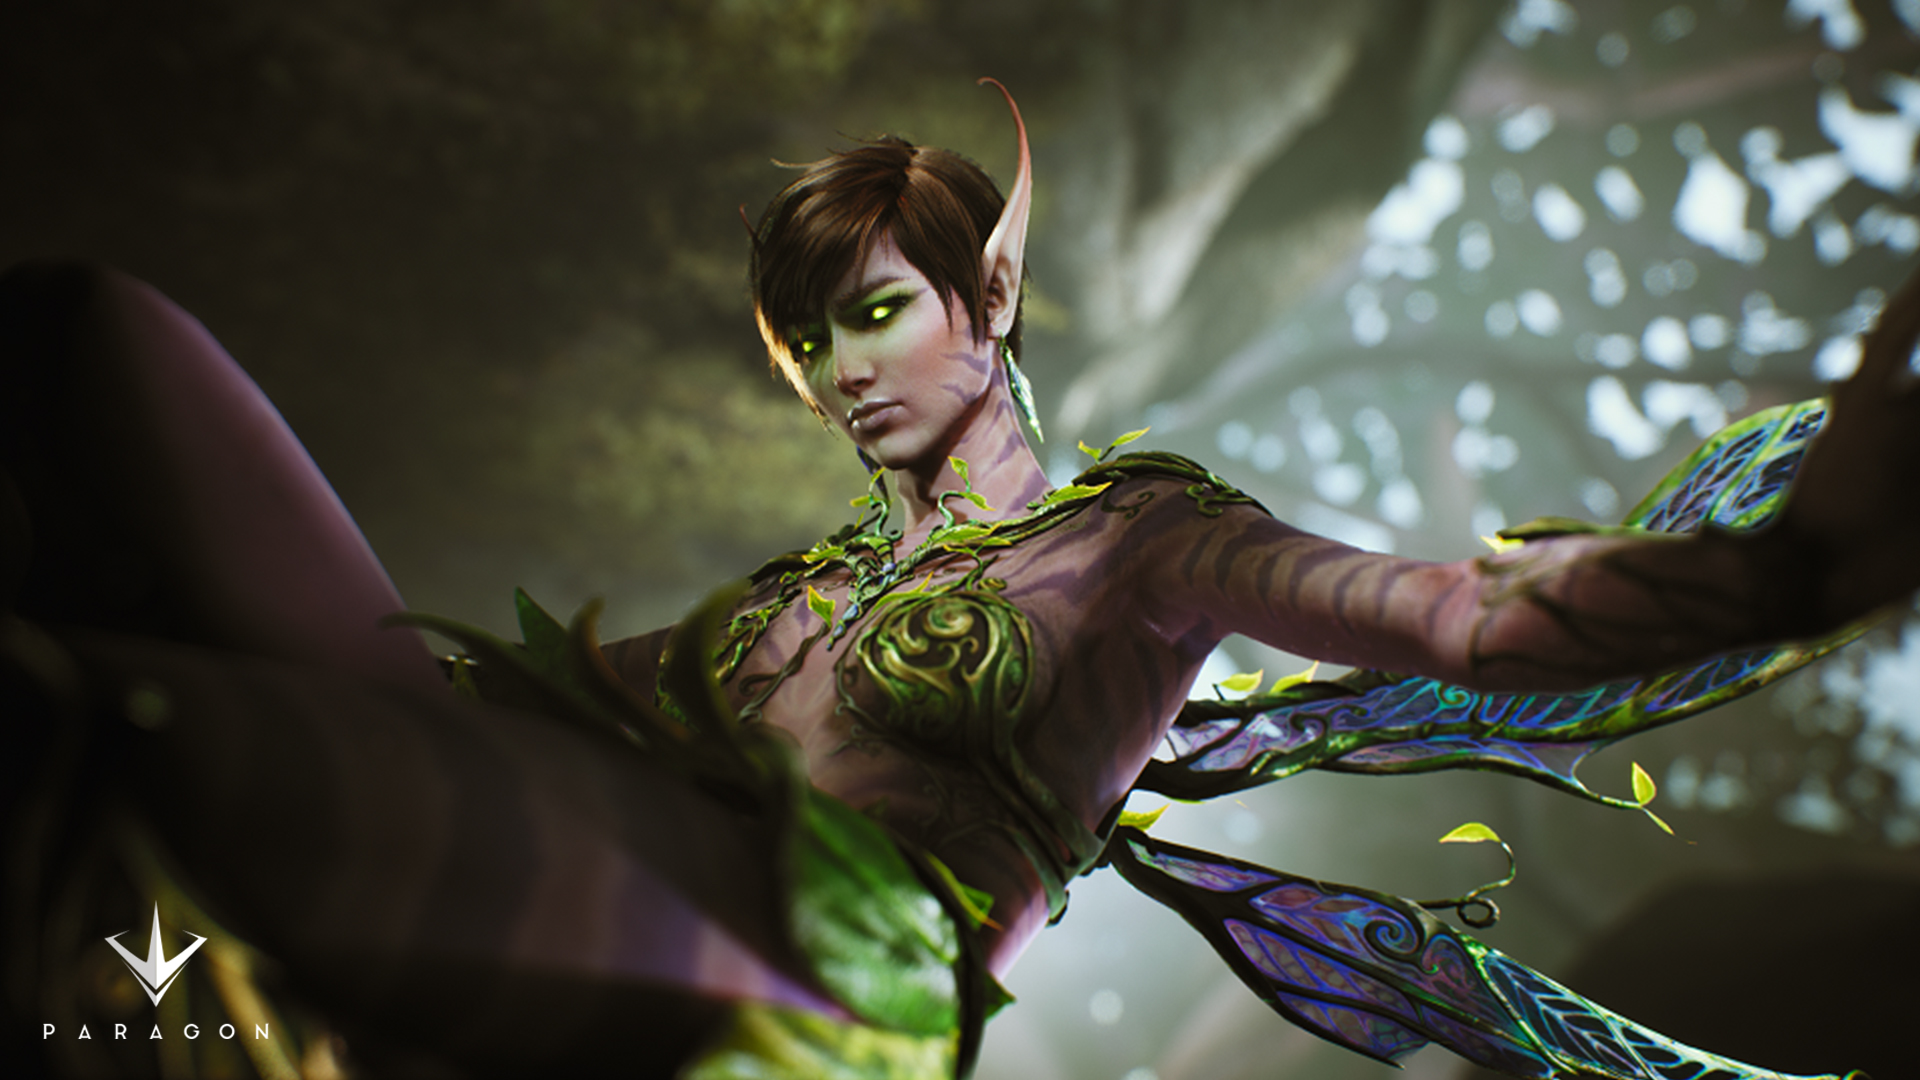 Paragon Unleashes The Ultimate Weapon Against Robots And Monsters: A Fairy Princess